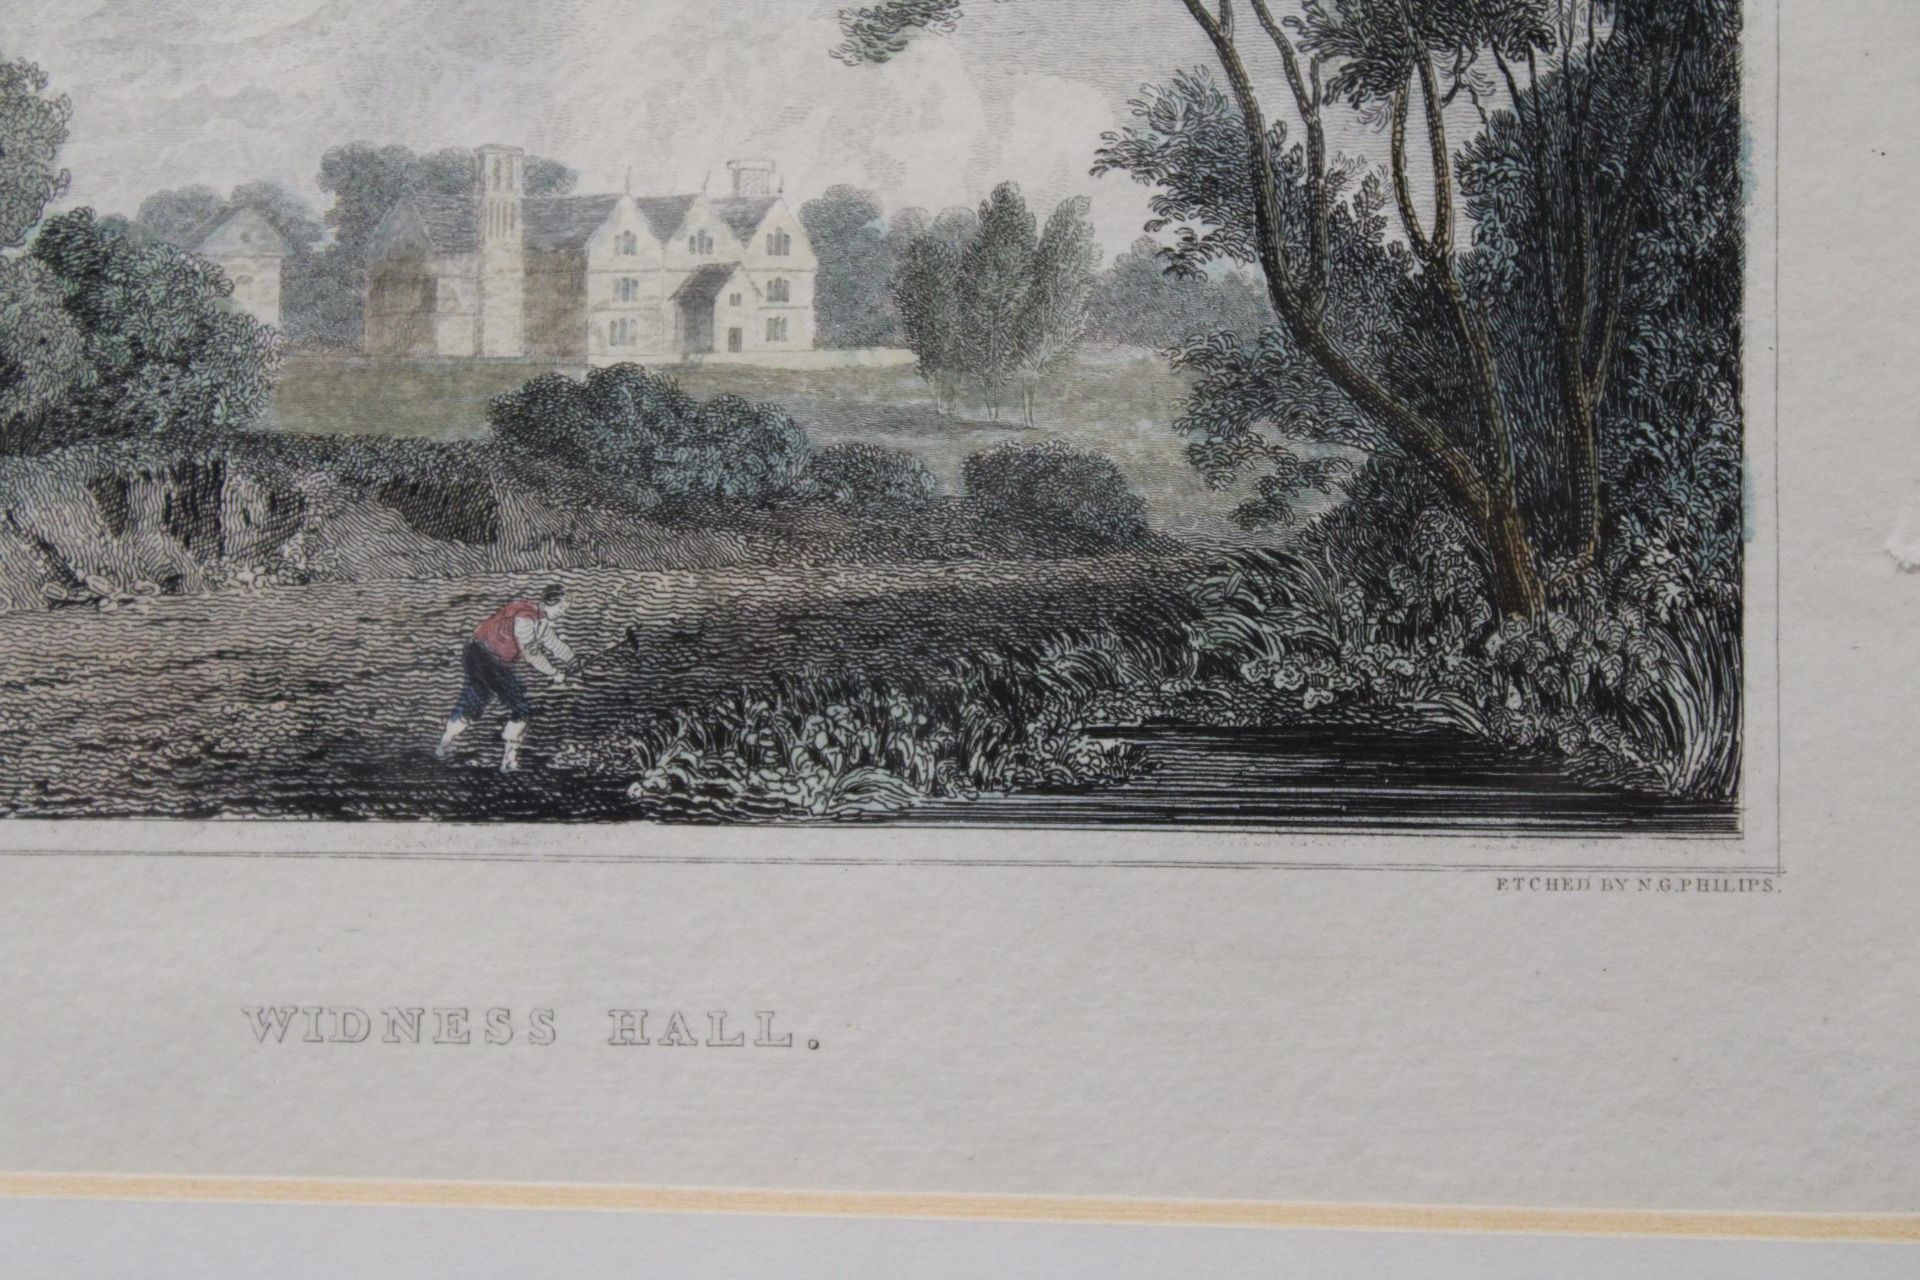 TWO VINTAGE COLOURED ENGRAVINGS, 'MOSLEYES HALL' AND 'WIDNESS HALL', FRAMED - Image 5 of 5